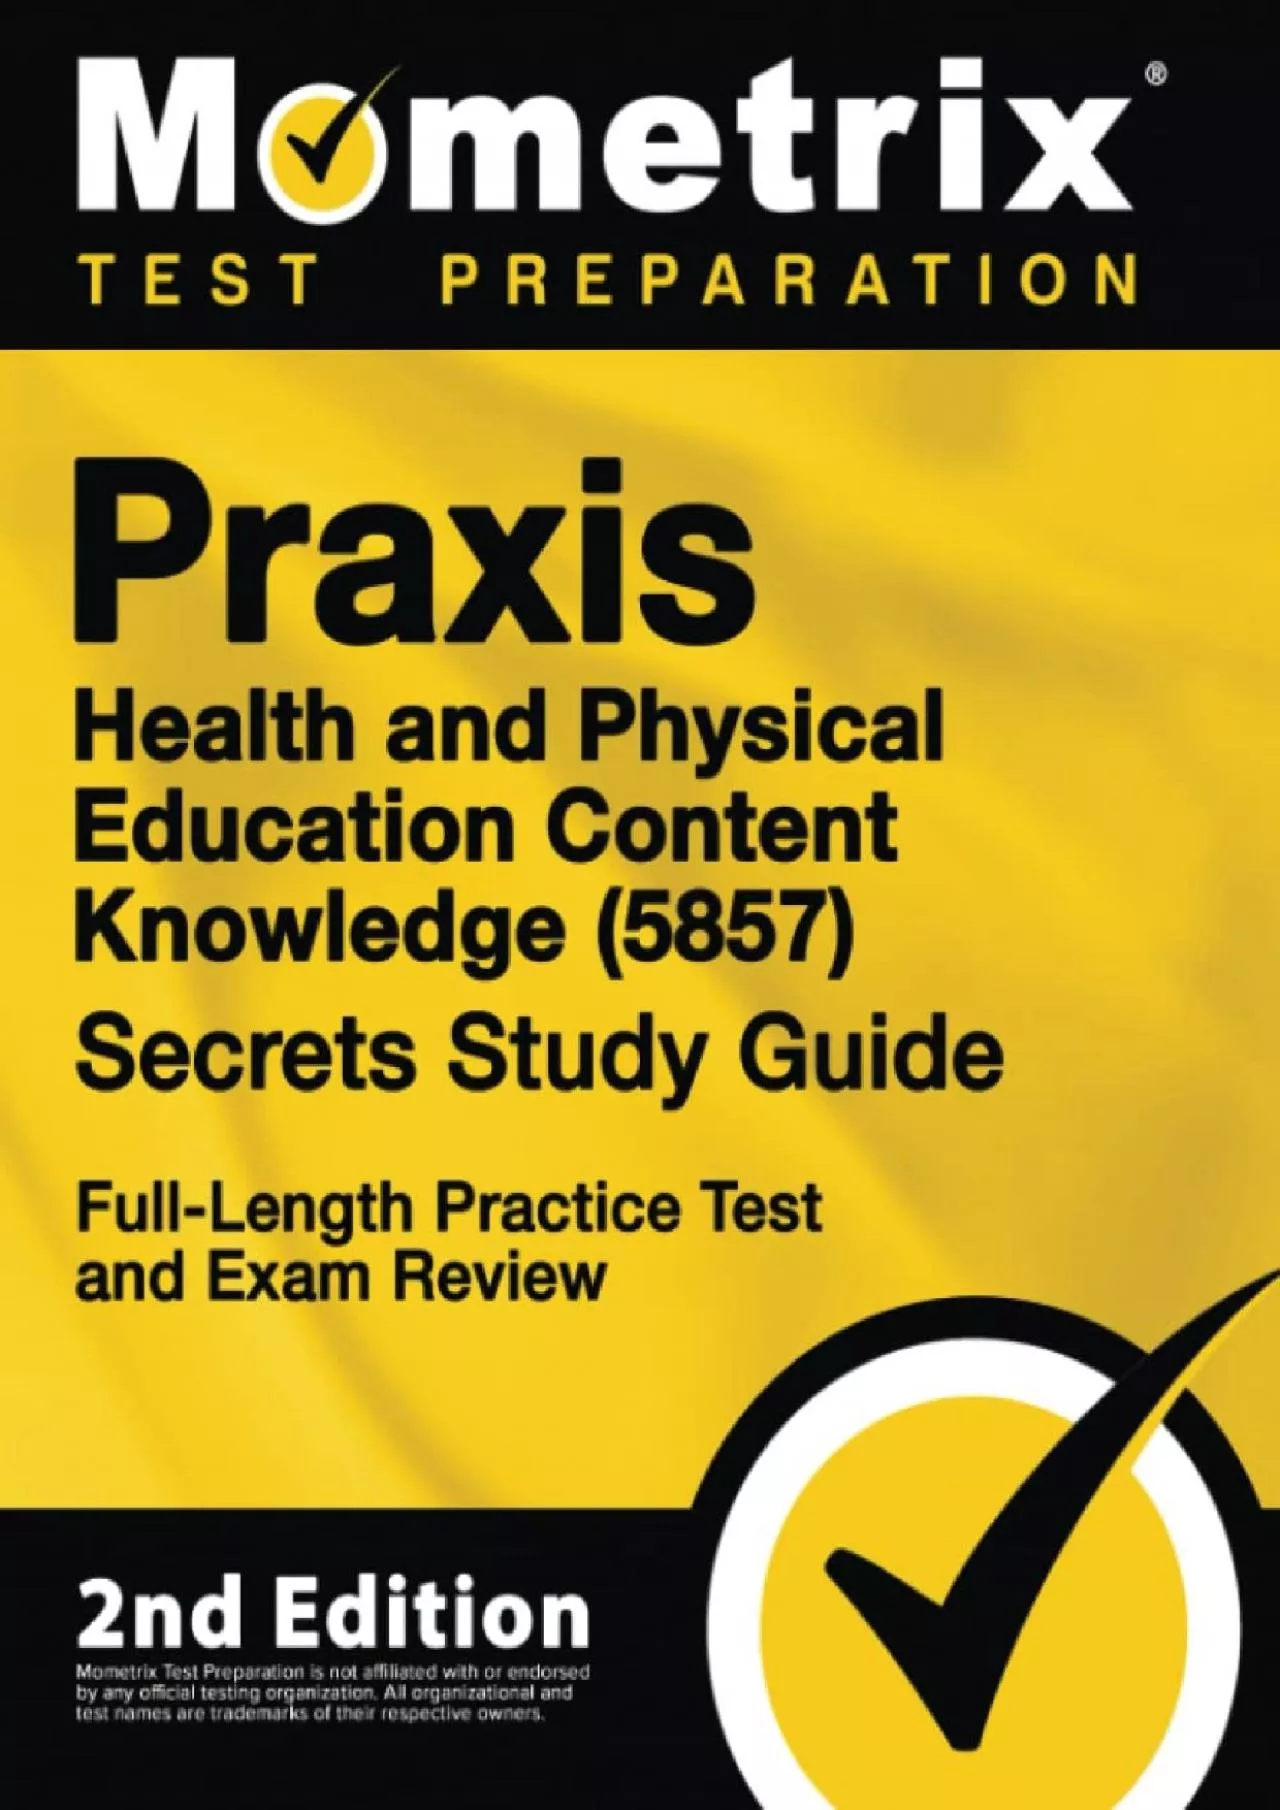 [DOWNLOAD] Praxis Health and Physical Education Content Knowledge 5857 Secrets Study Guide